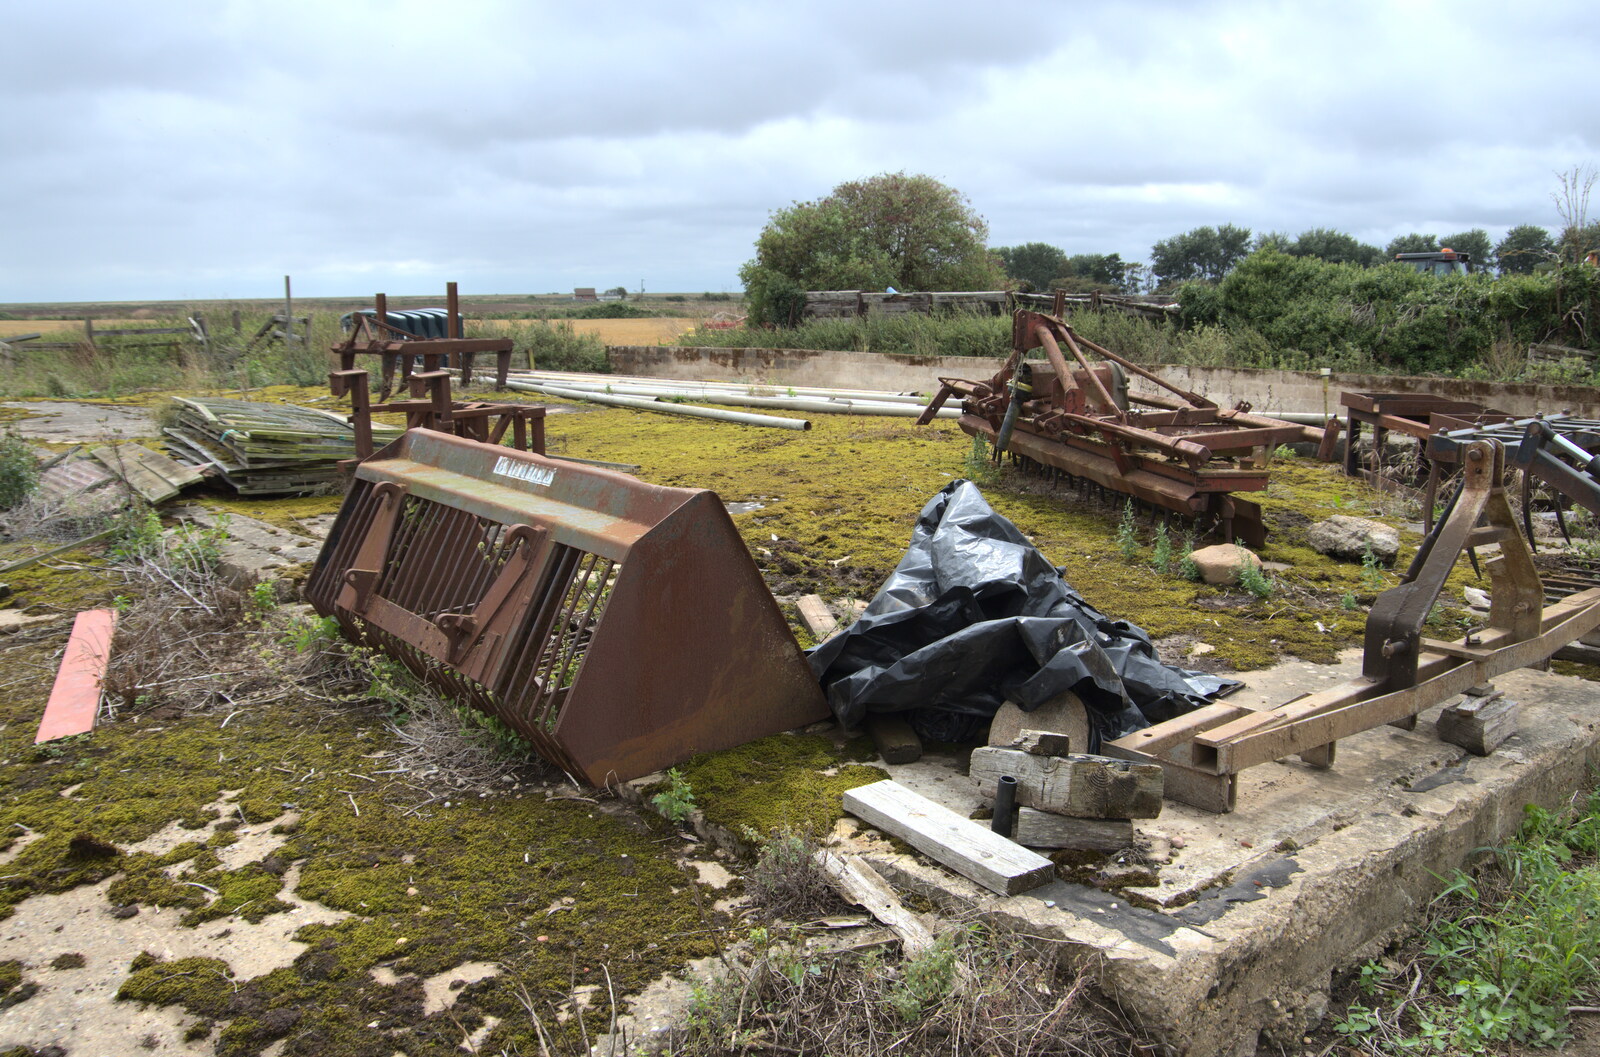 A collection of rusting farm machinery from A Trip to Orford, Suffolk - 29th August 2020